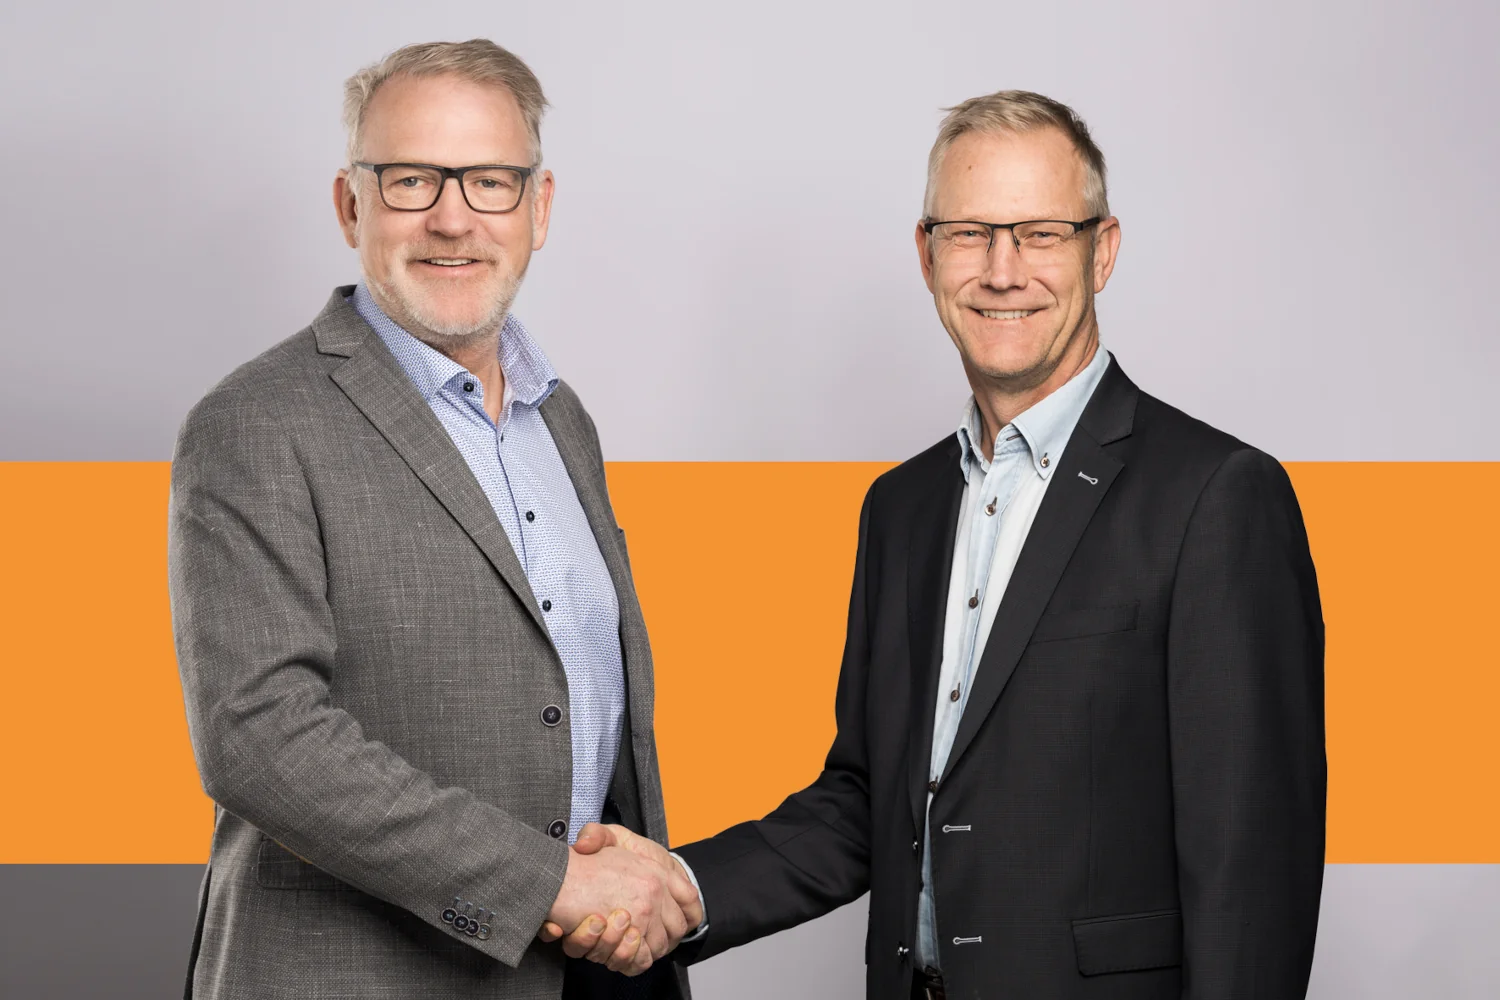 From left to right: Torbjörn Egerhag and Dan Hagström are looking forward to their new roles within the Feddersen Group.